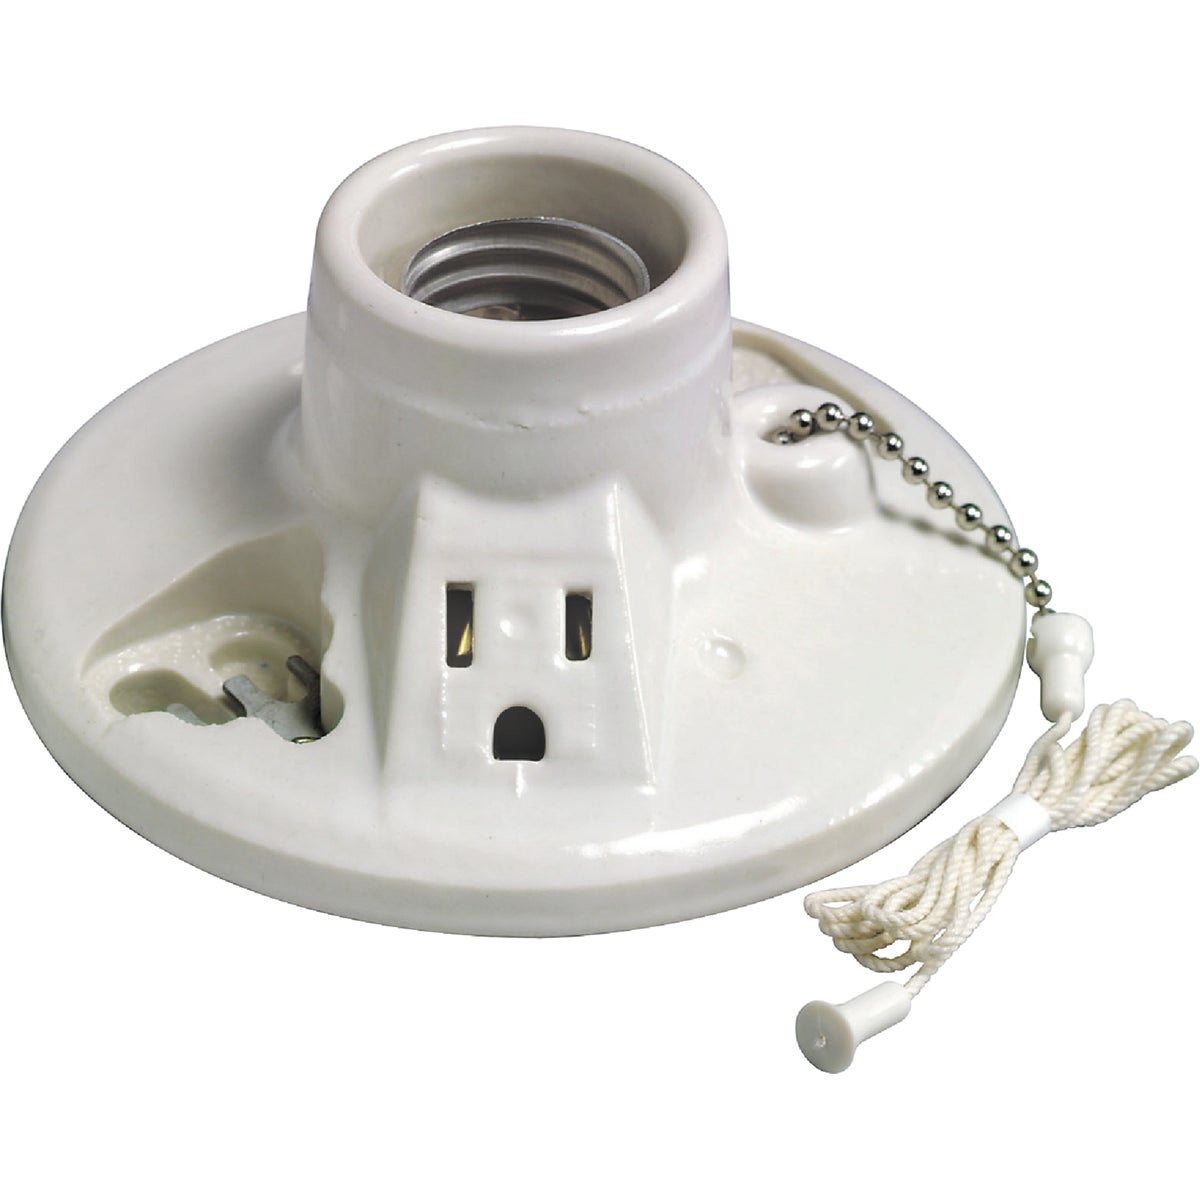 Item 503878, Porcelain lampholder with pull chain and grounding outlet.